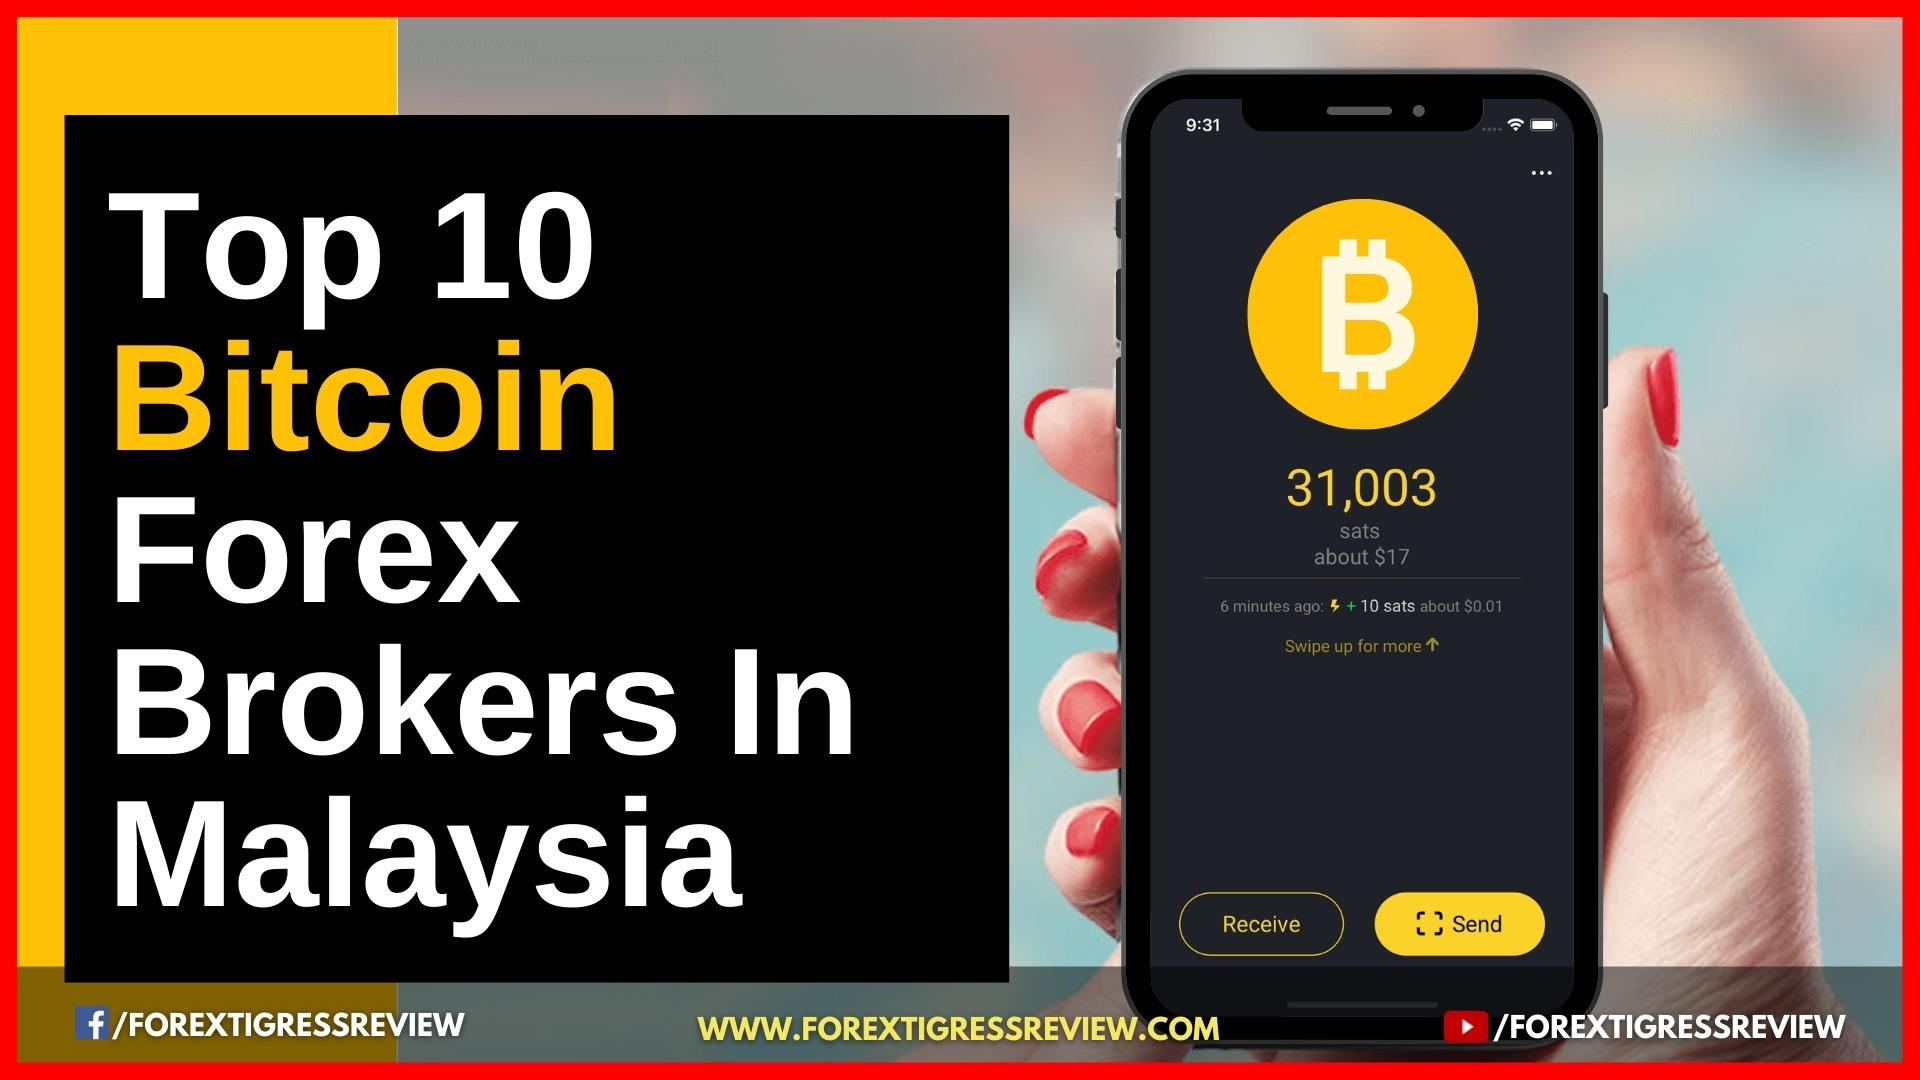 Top Bitcoin Forex Brokers In Malaysia - Forex Tigress Review